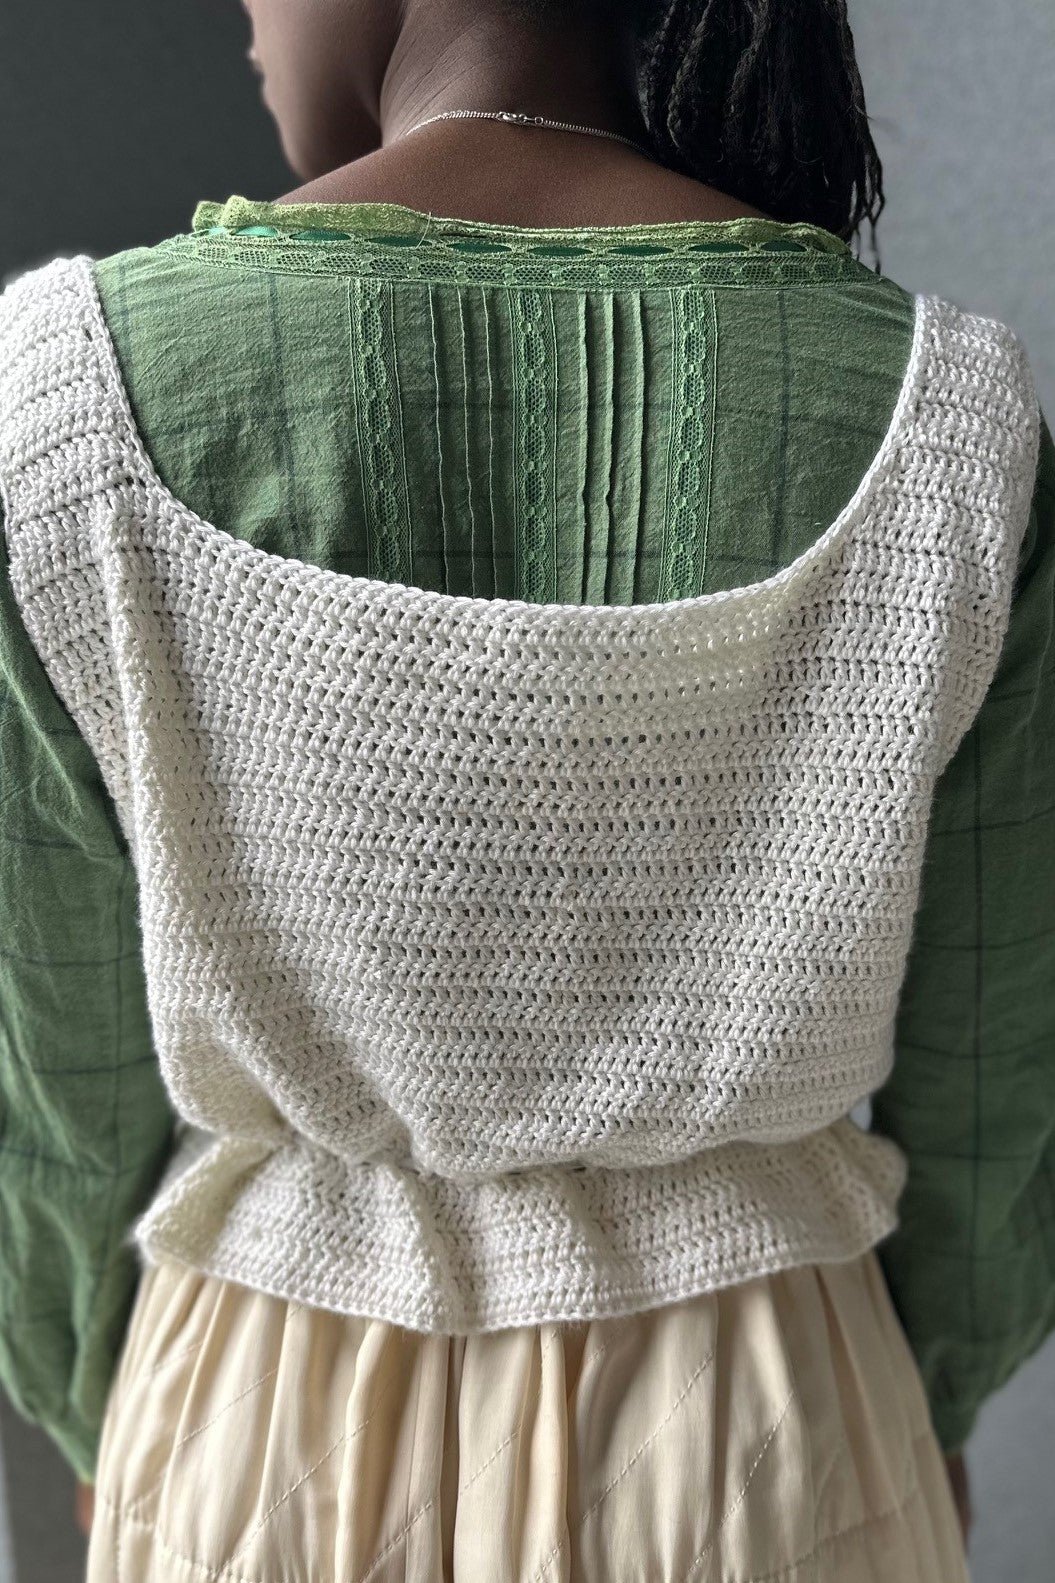 Black woman wearing a cream quilted skirt with a green blouse and white crocheted camisole on top - close up of the back - in front of a grey wall.